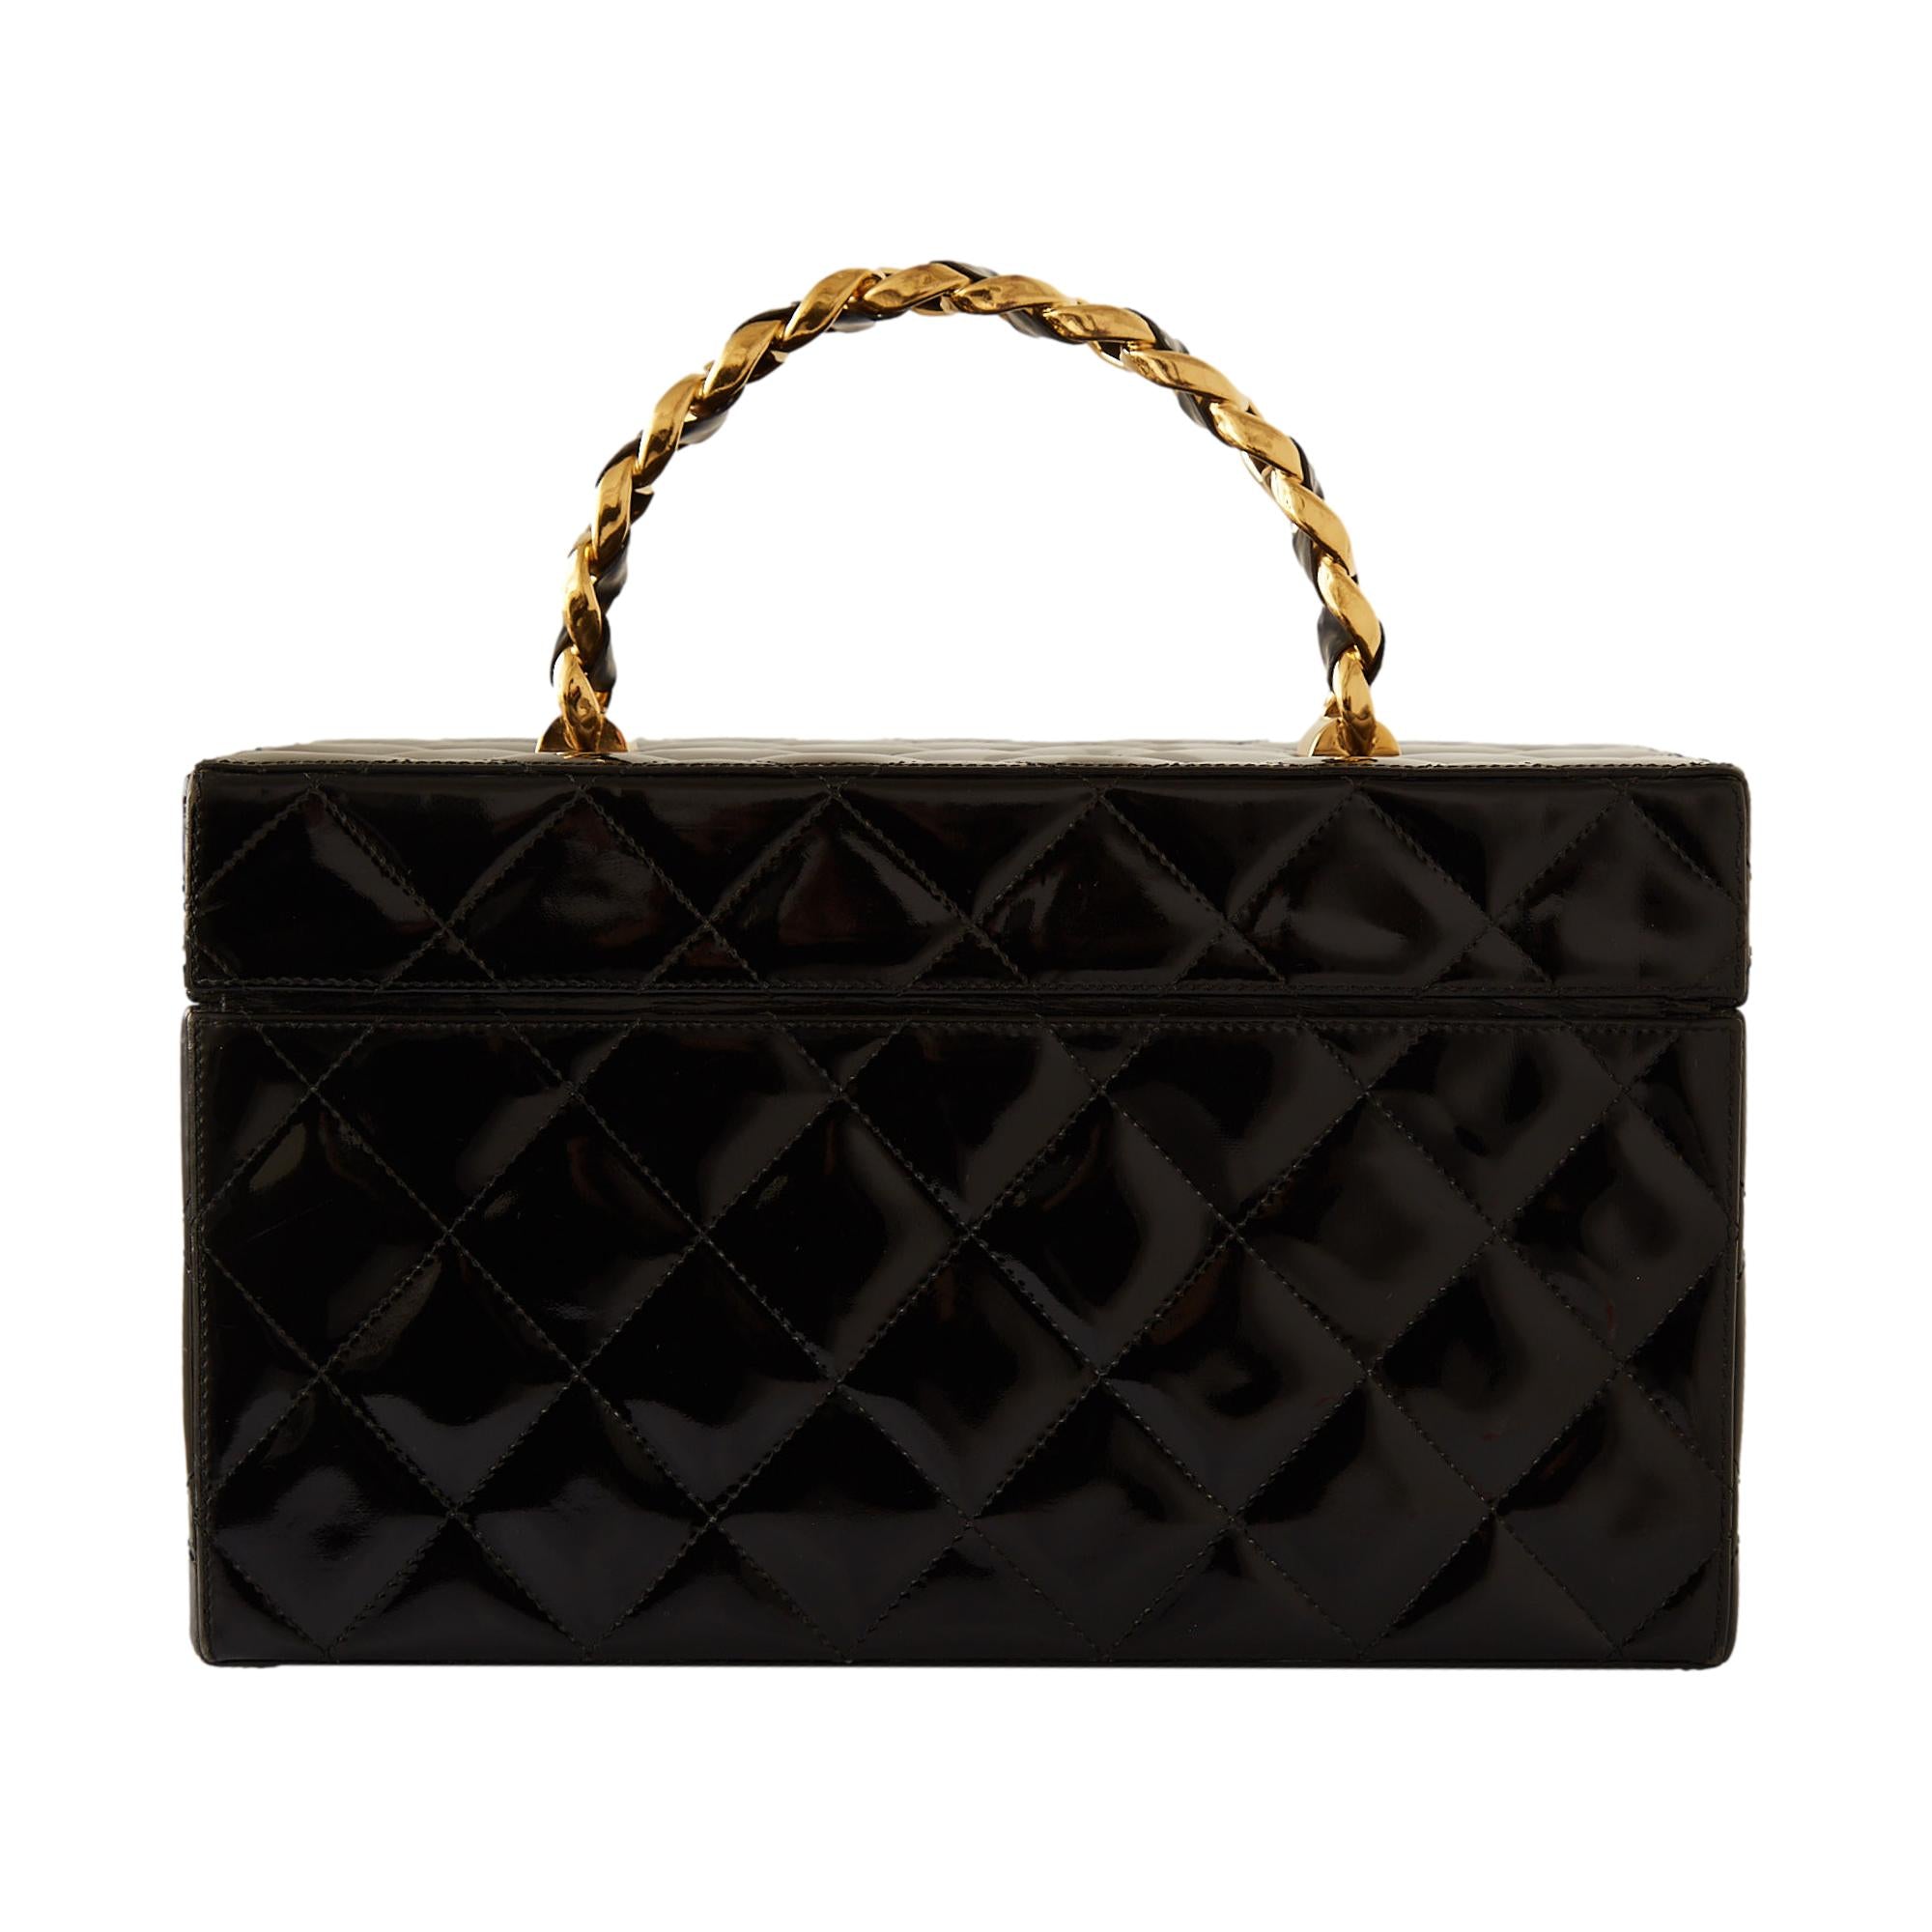 Chanel Black Jumbo Quilted Patent Vanity Bag